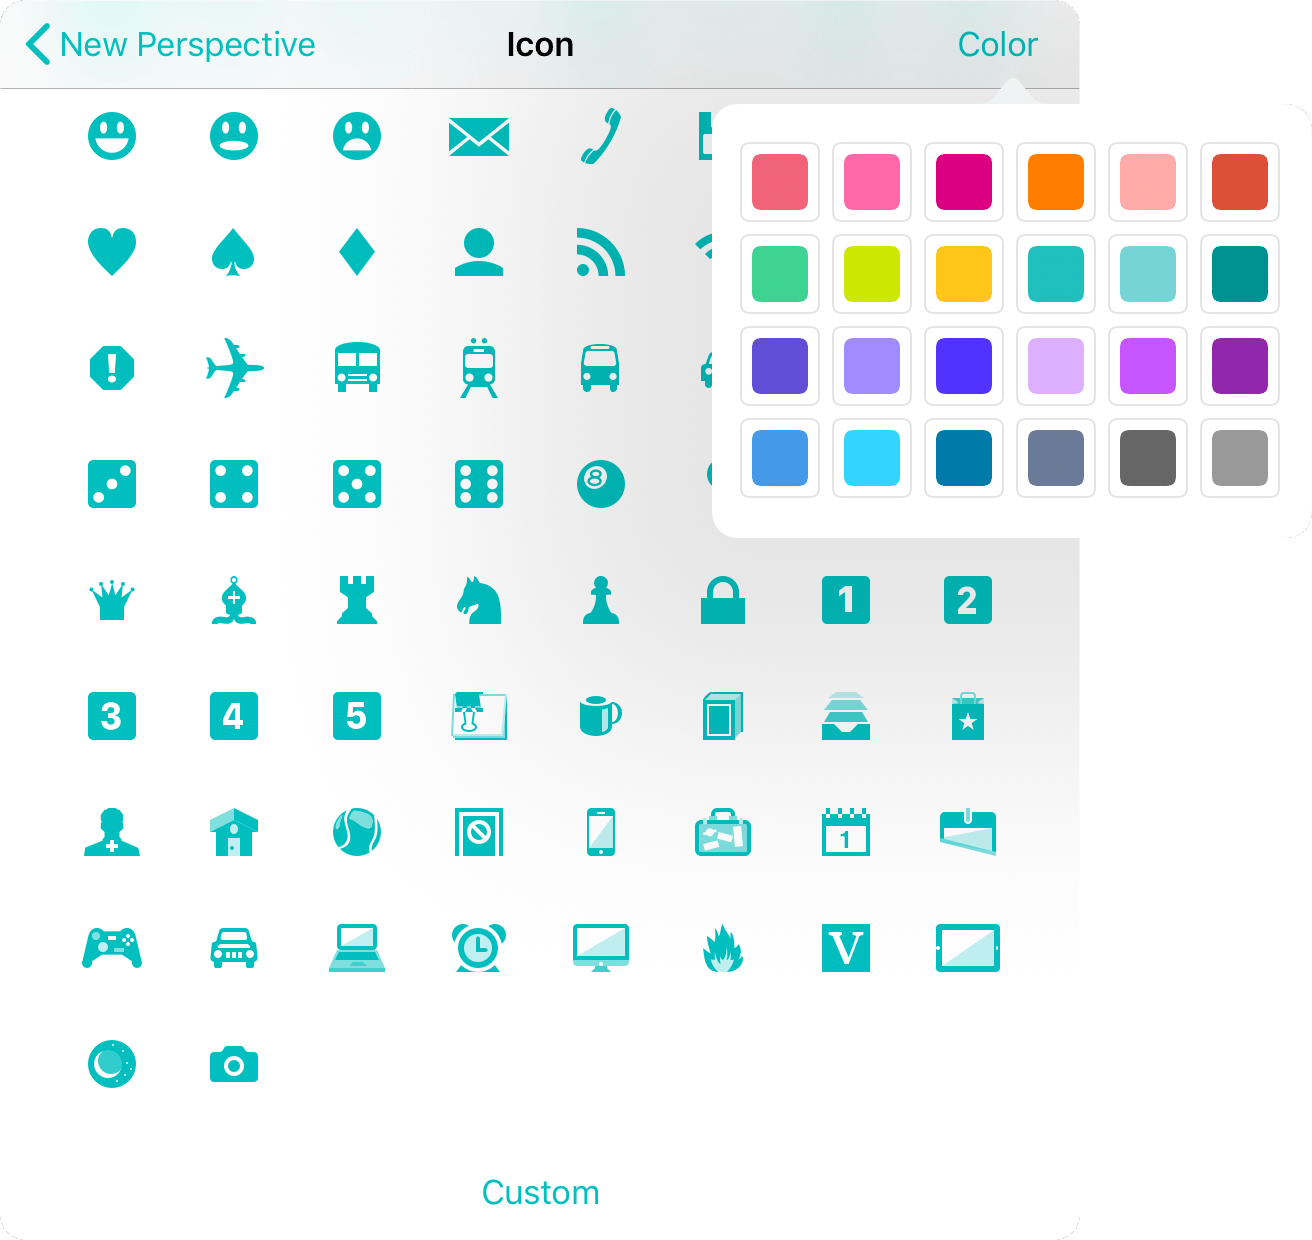 Choosing an icon and color for a custom perspective.